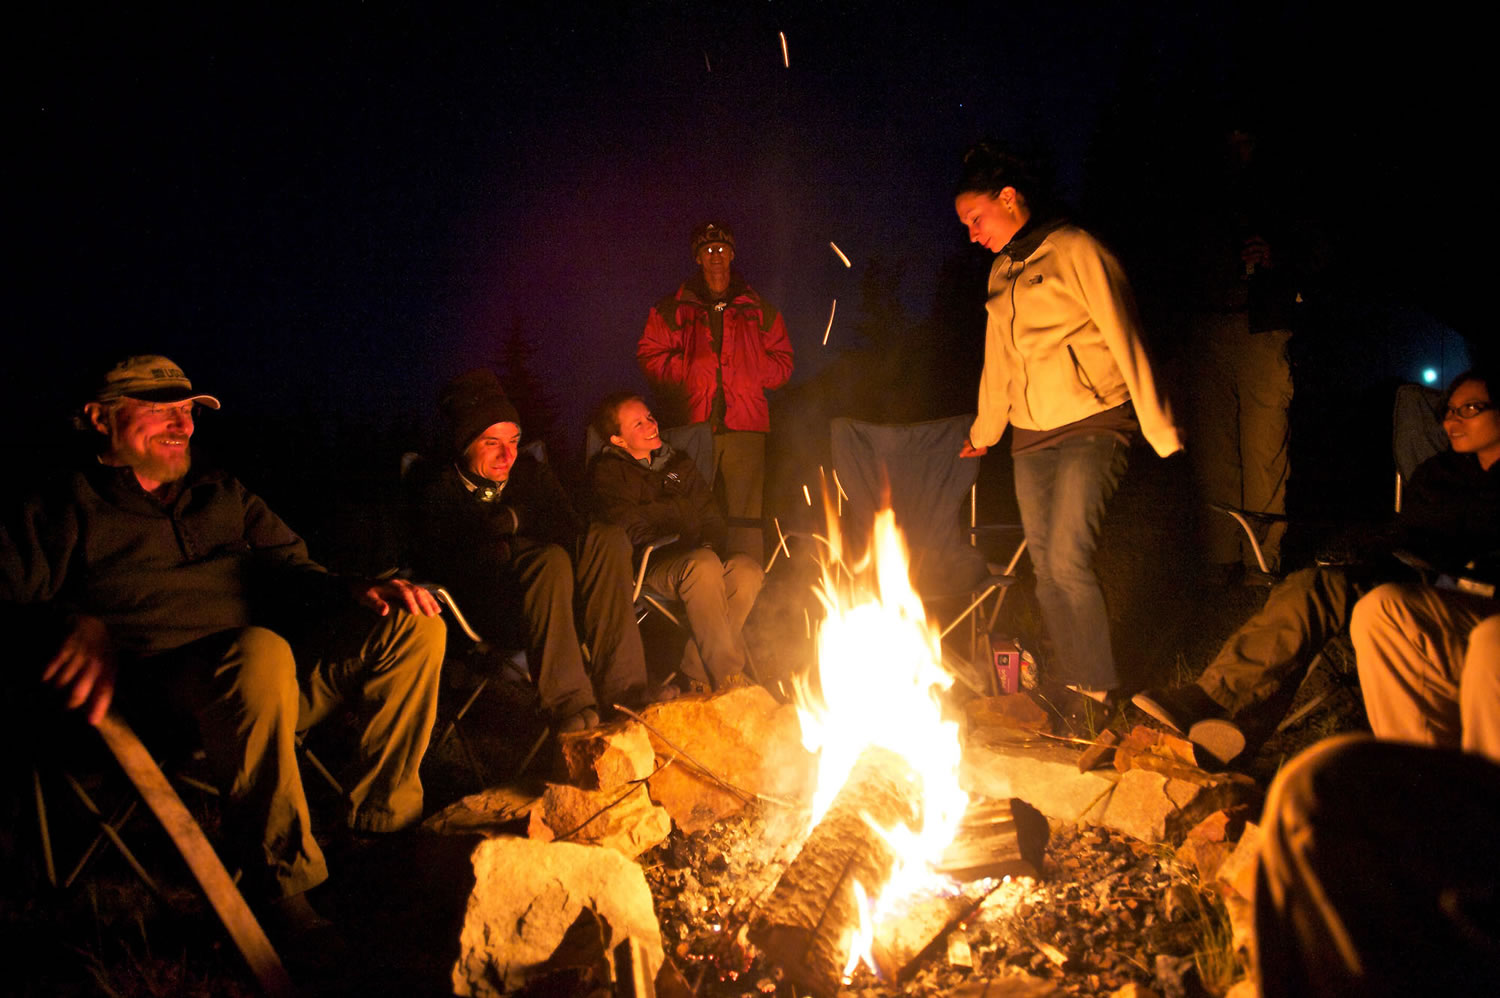 Sitting around a campfire, geologists from several countries swap tales about mysterious creatures at the Mount St.